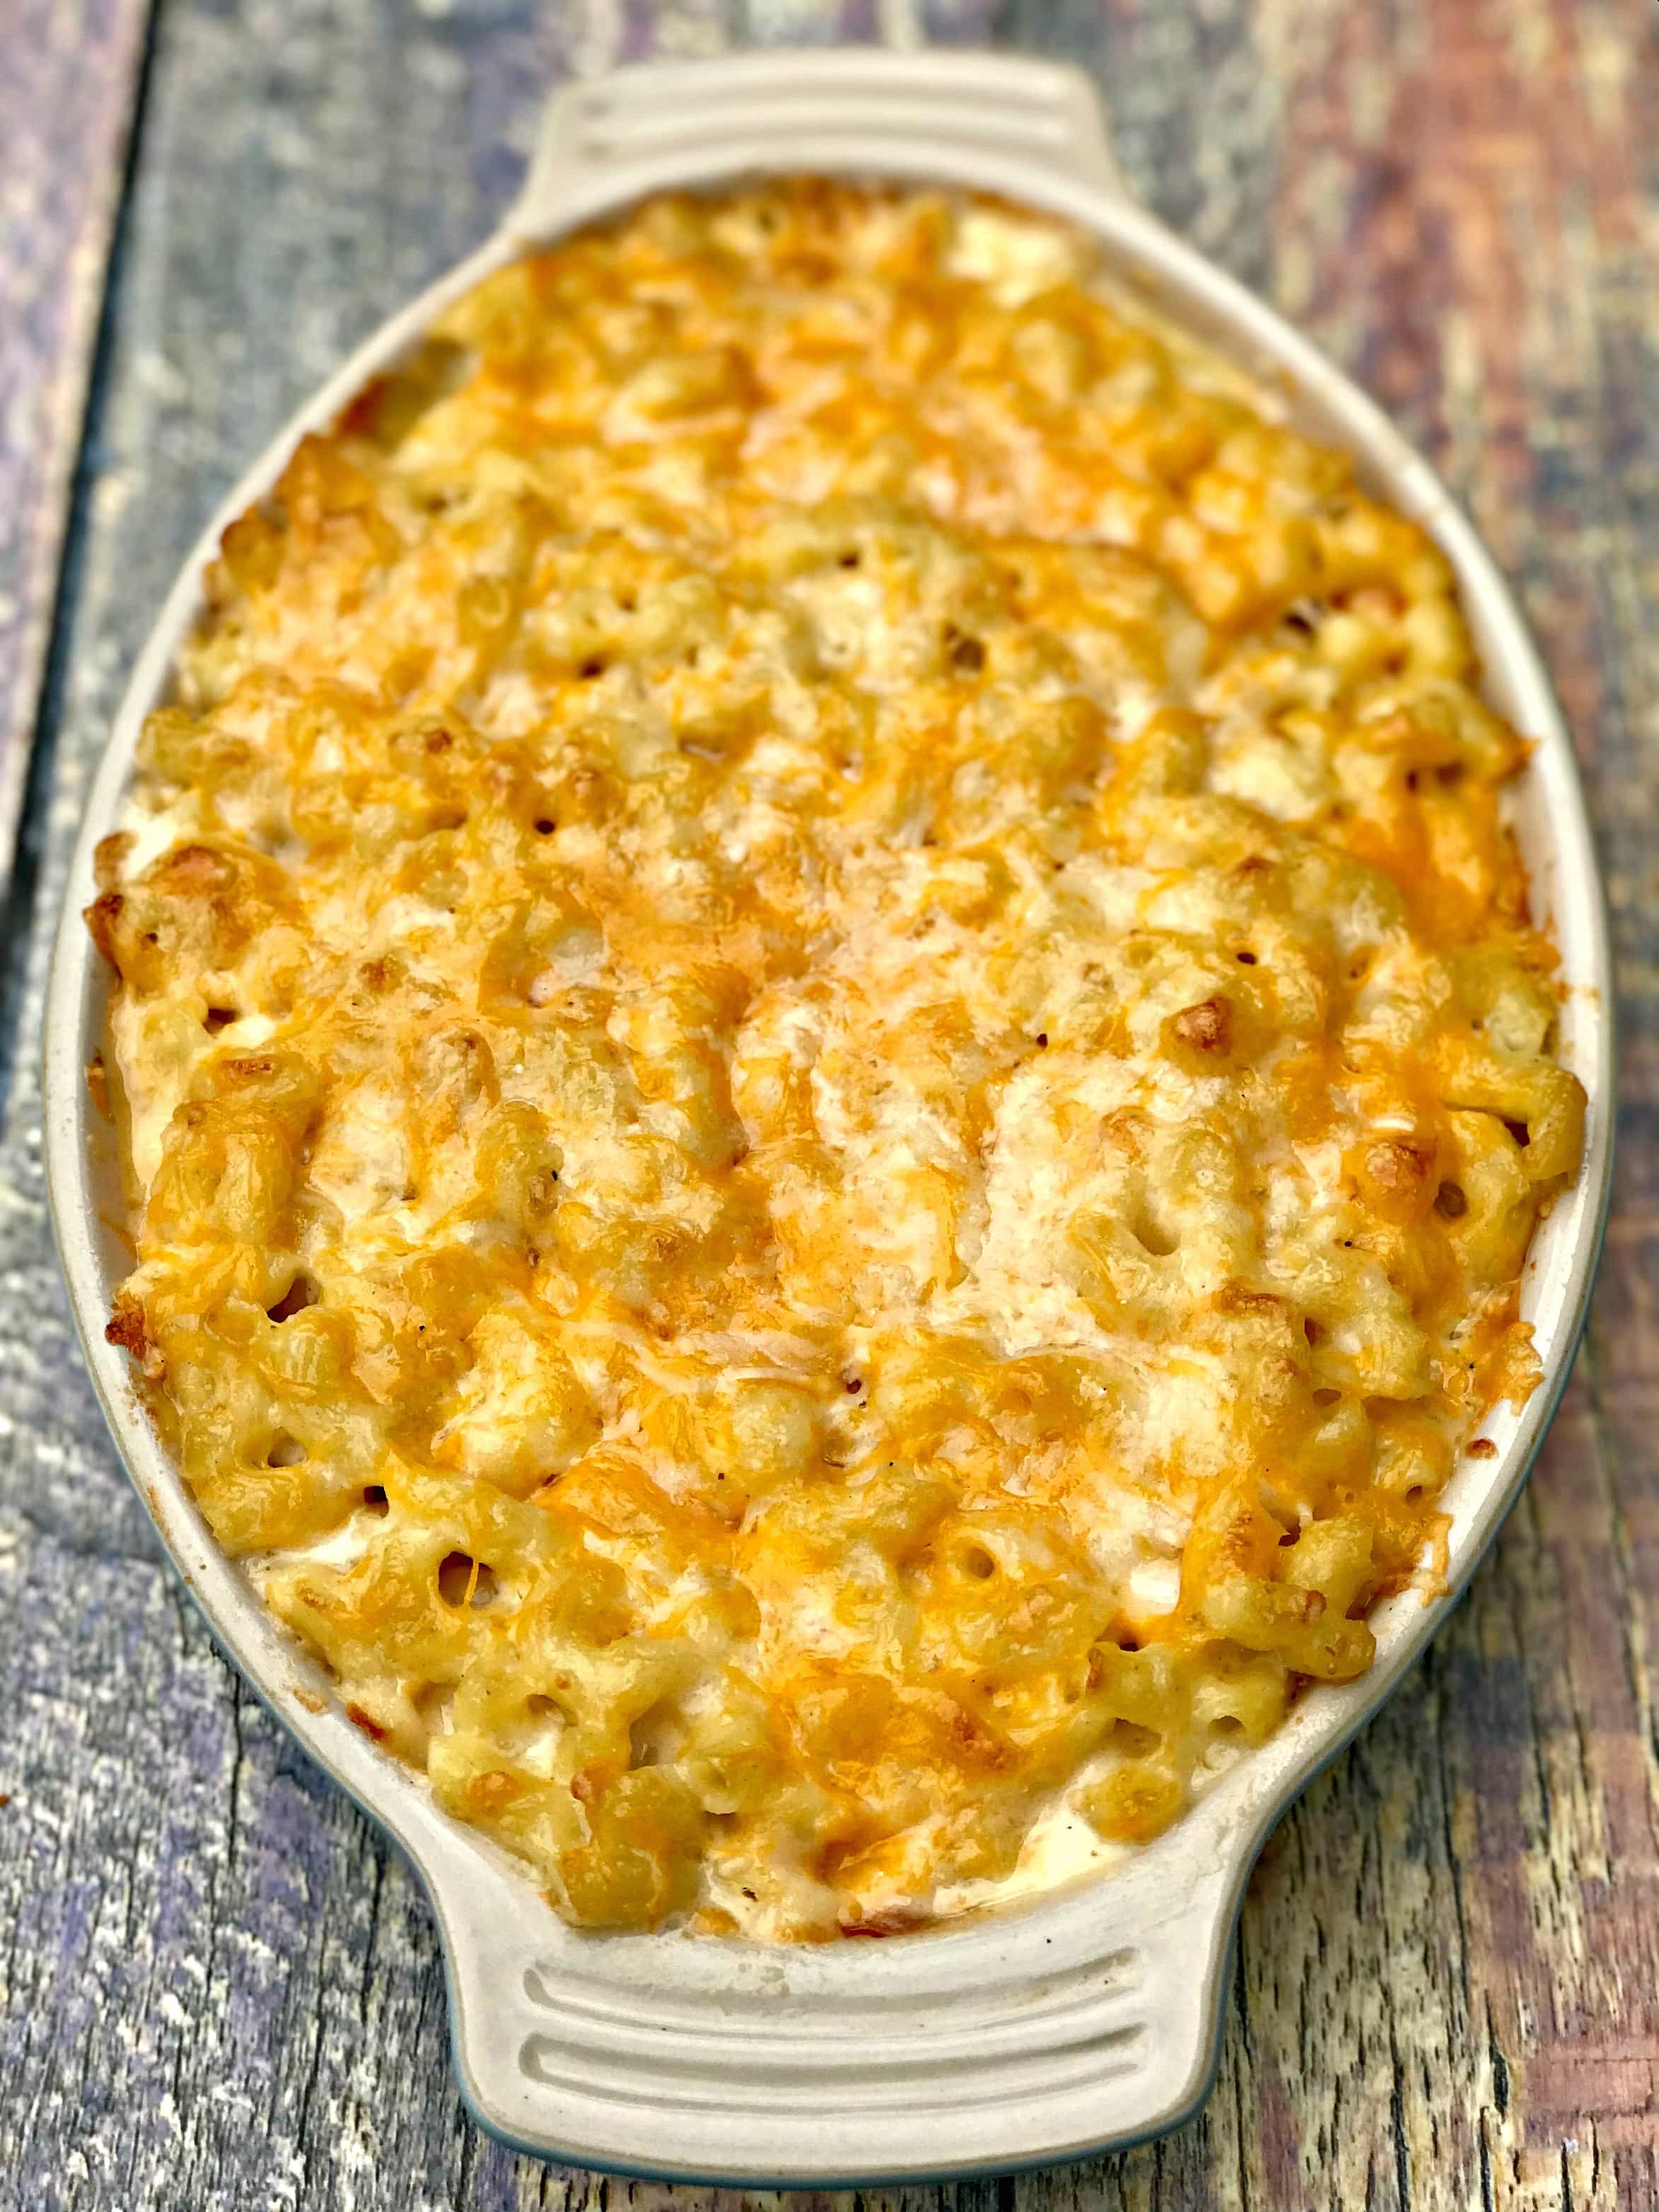 southern style baked macaroni and cheese - Stay Snatched